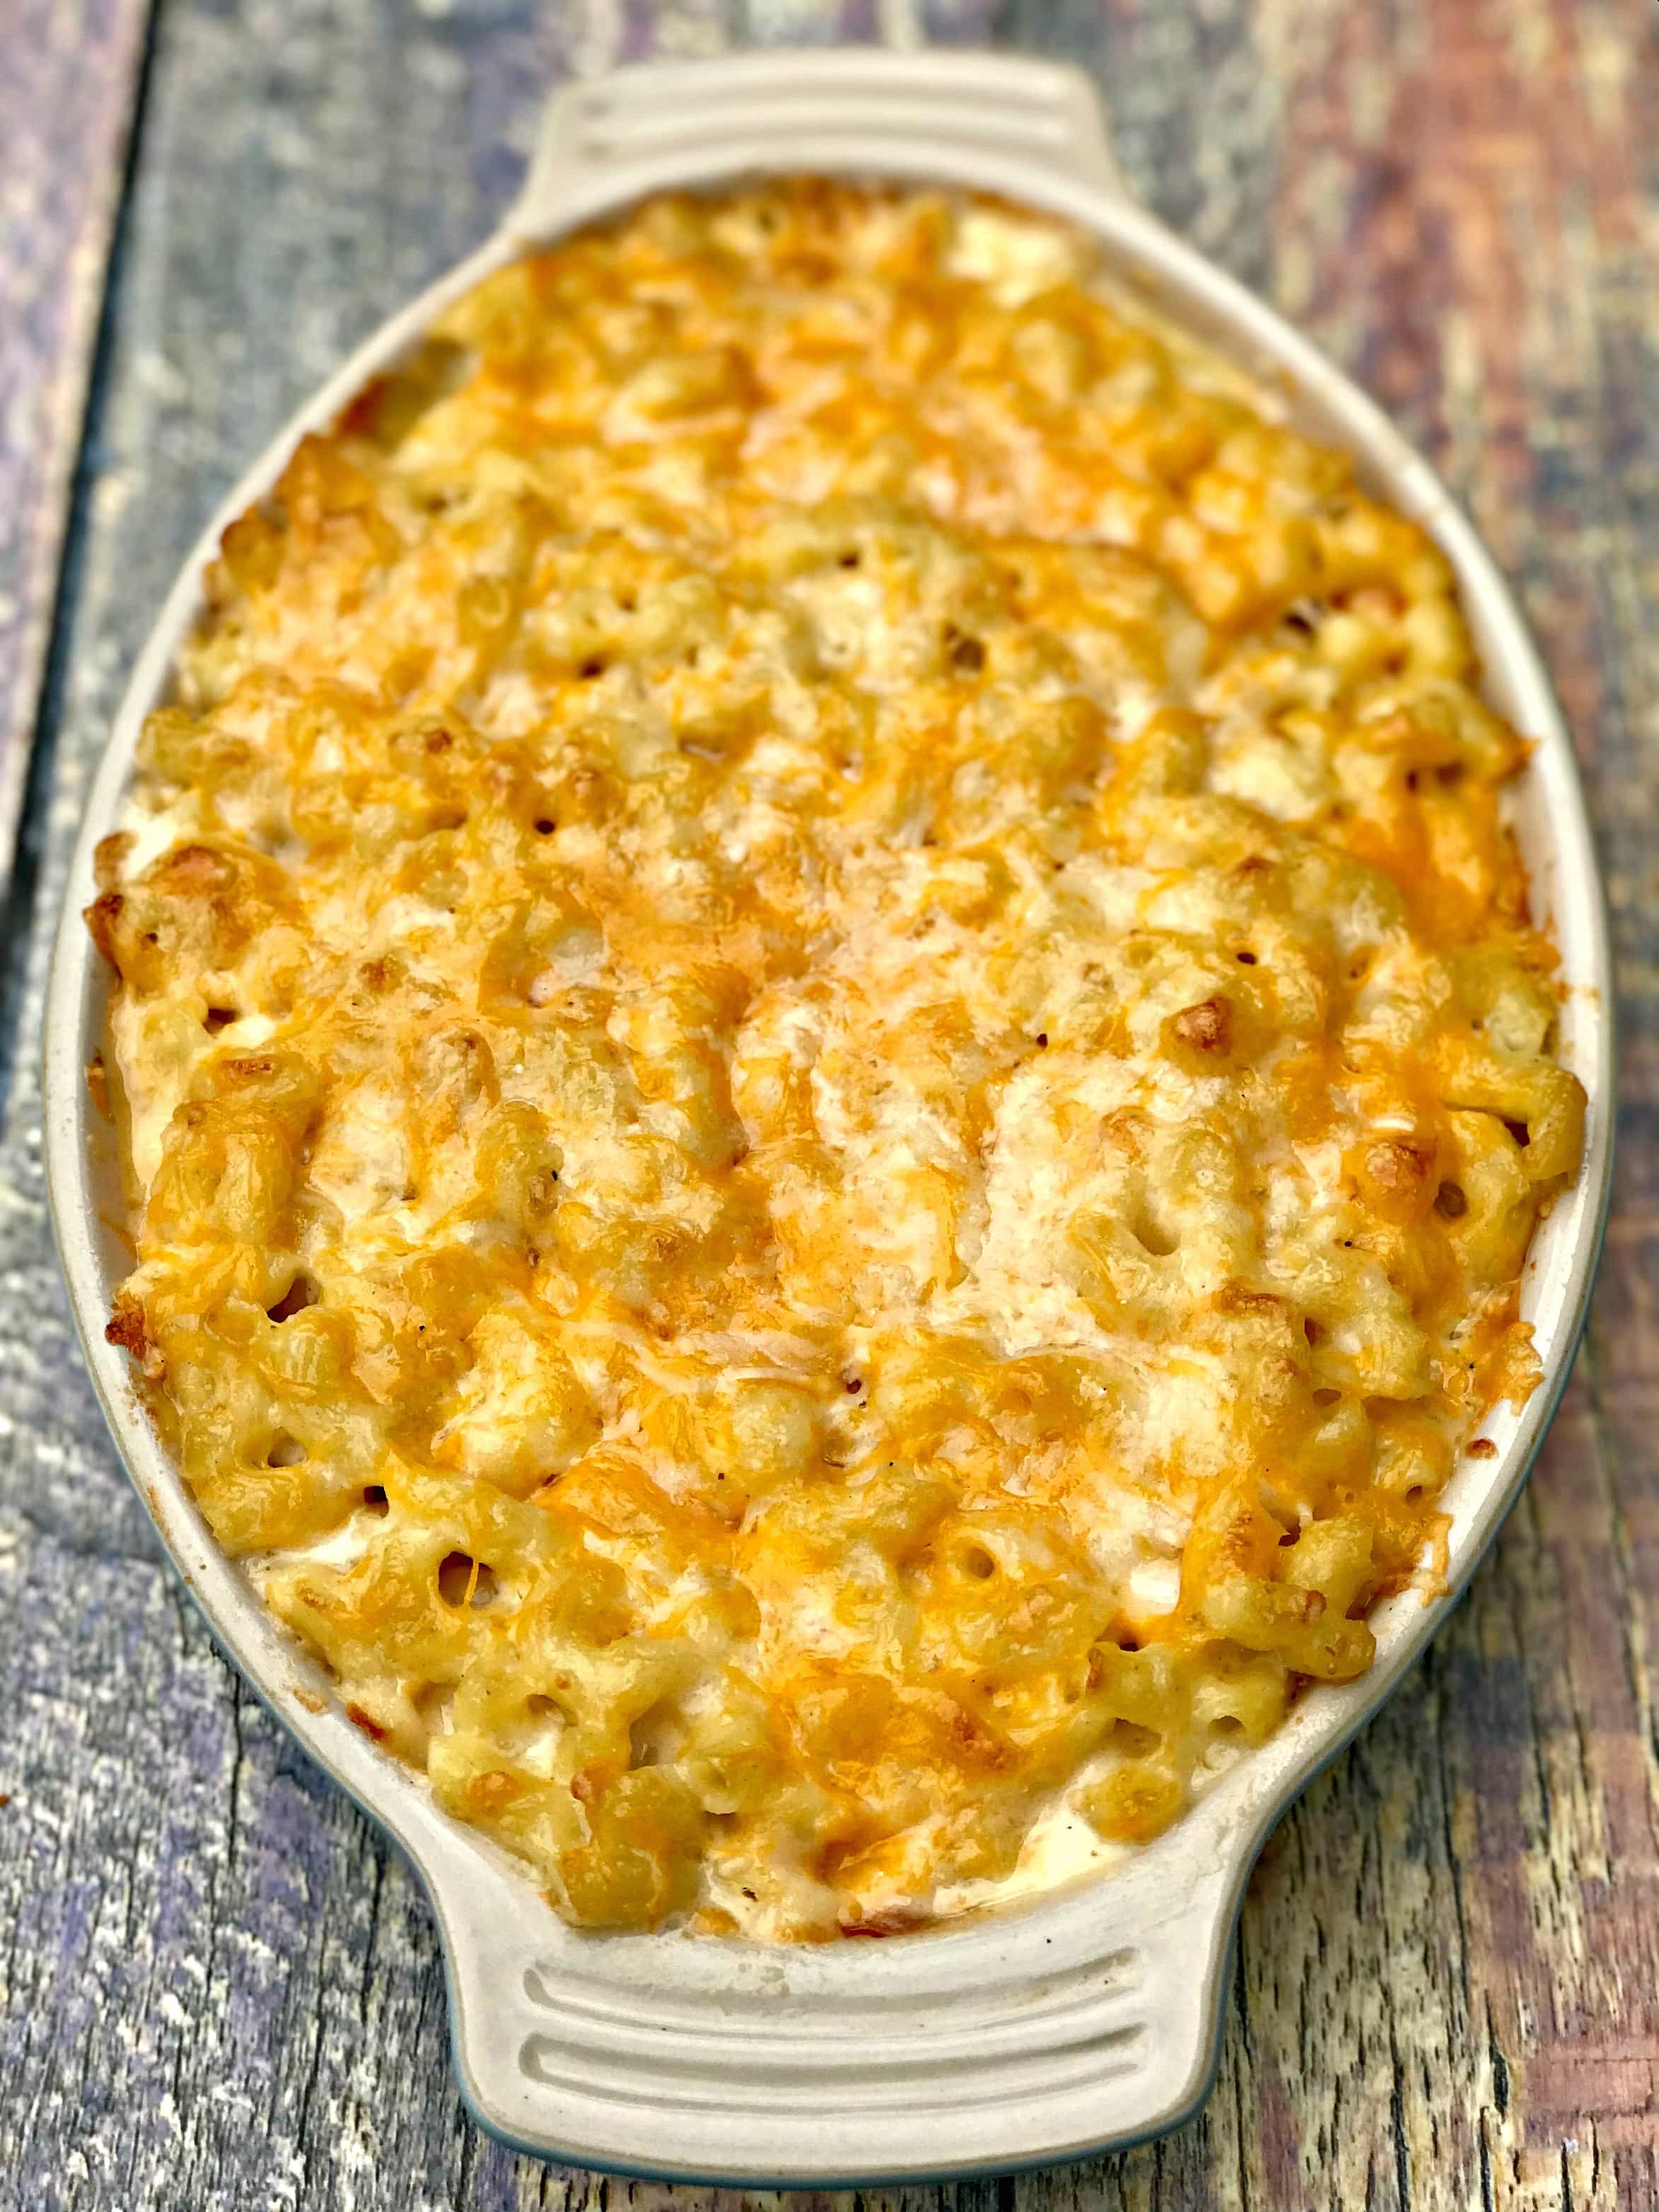 southern style baked macaroni and cheese - Stay Snatched